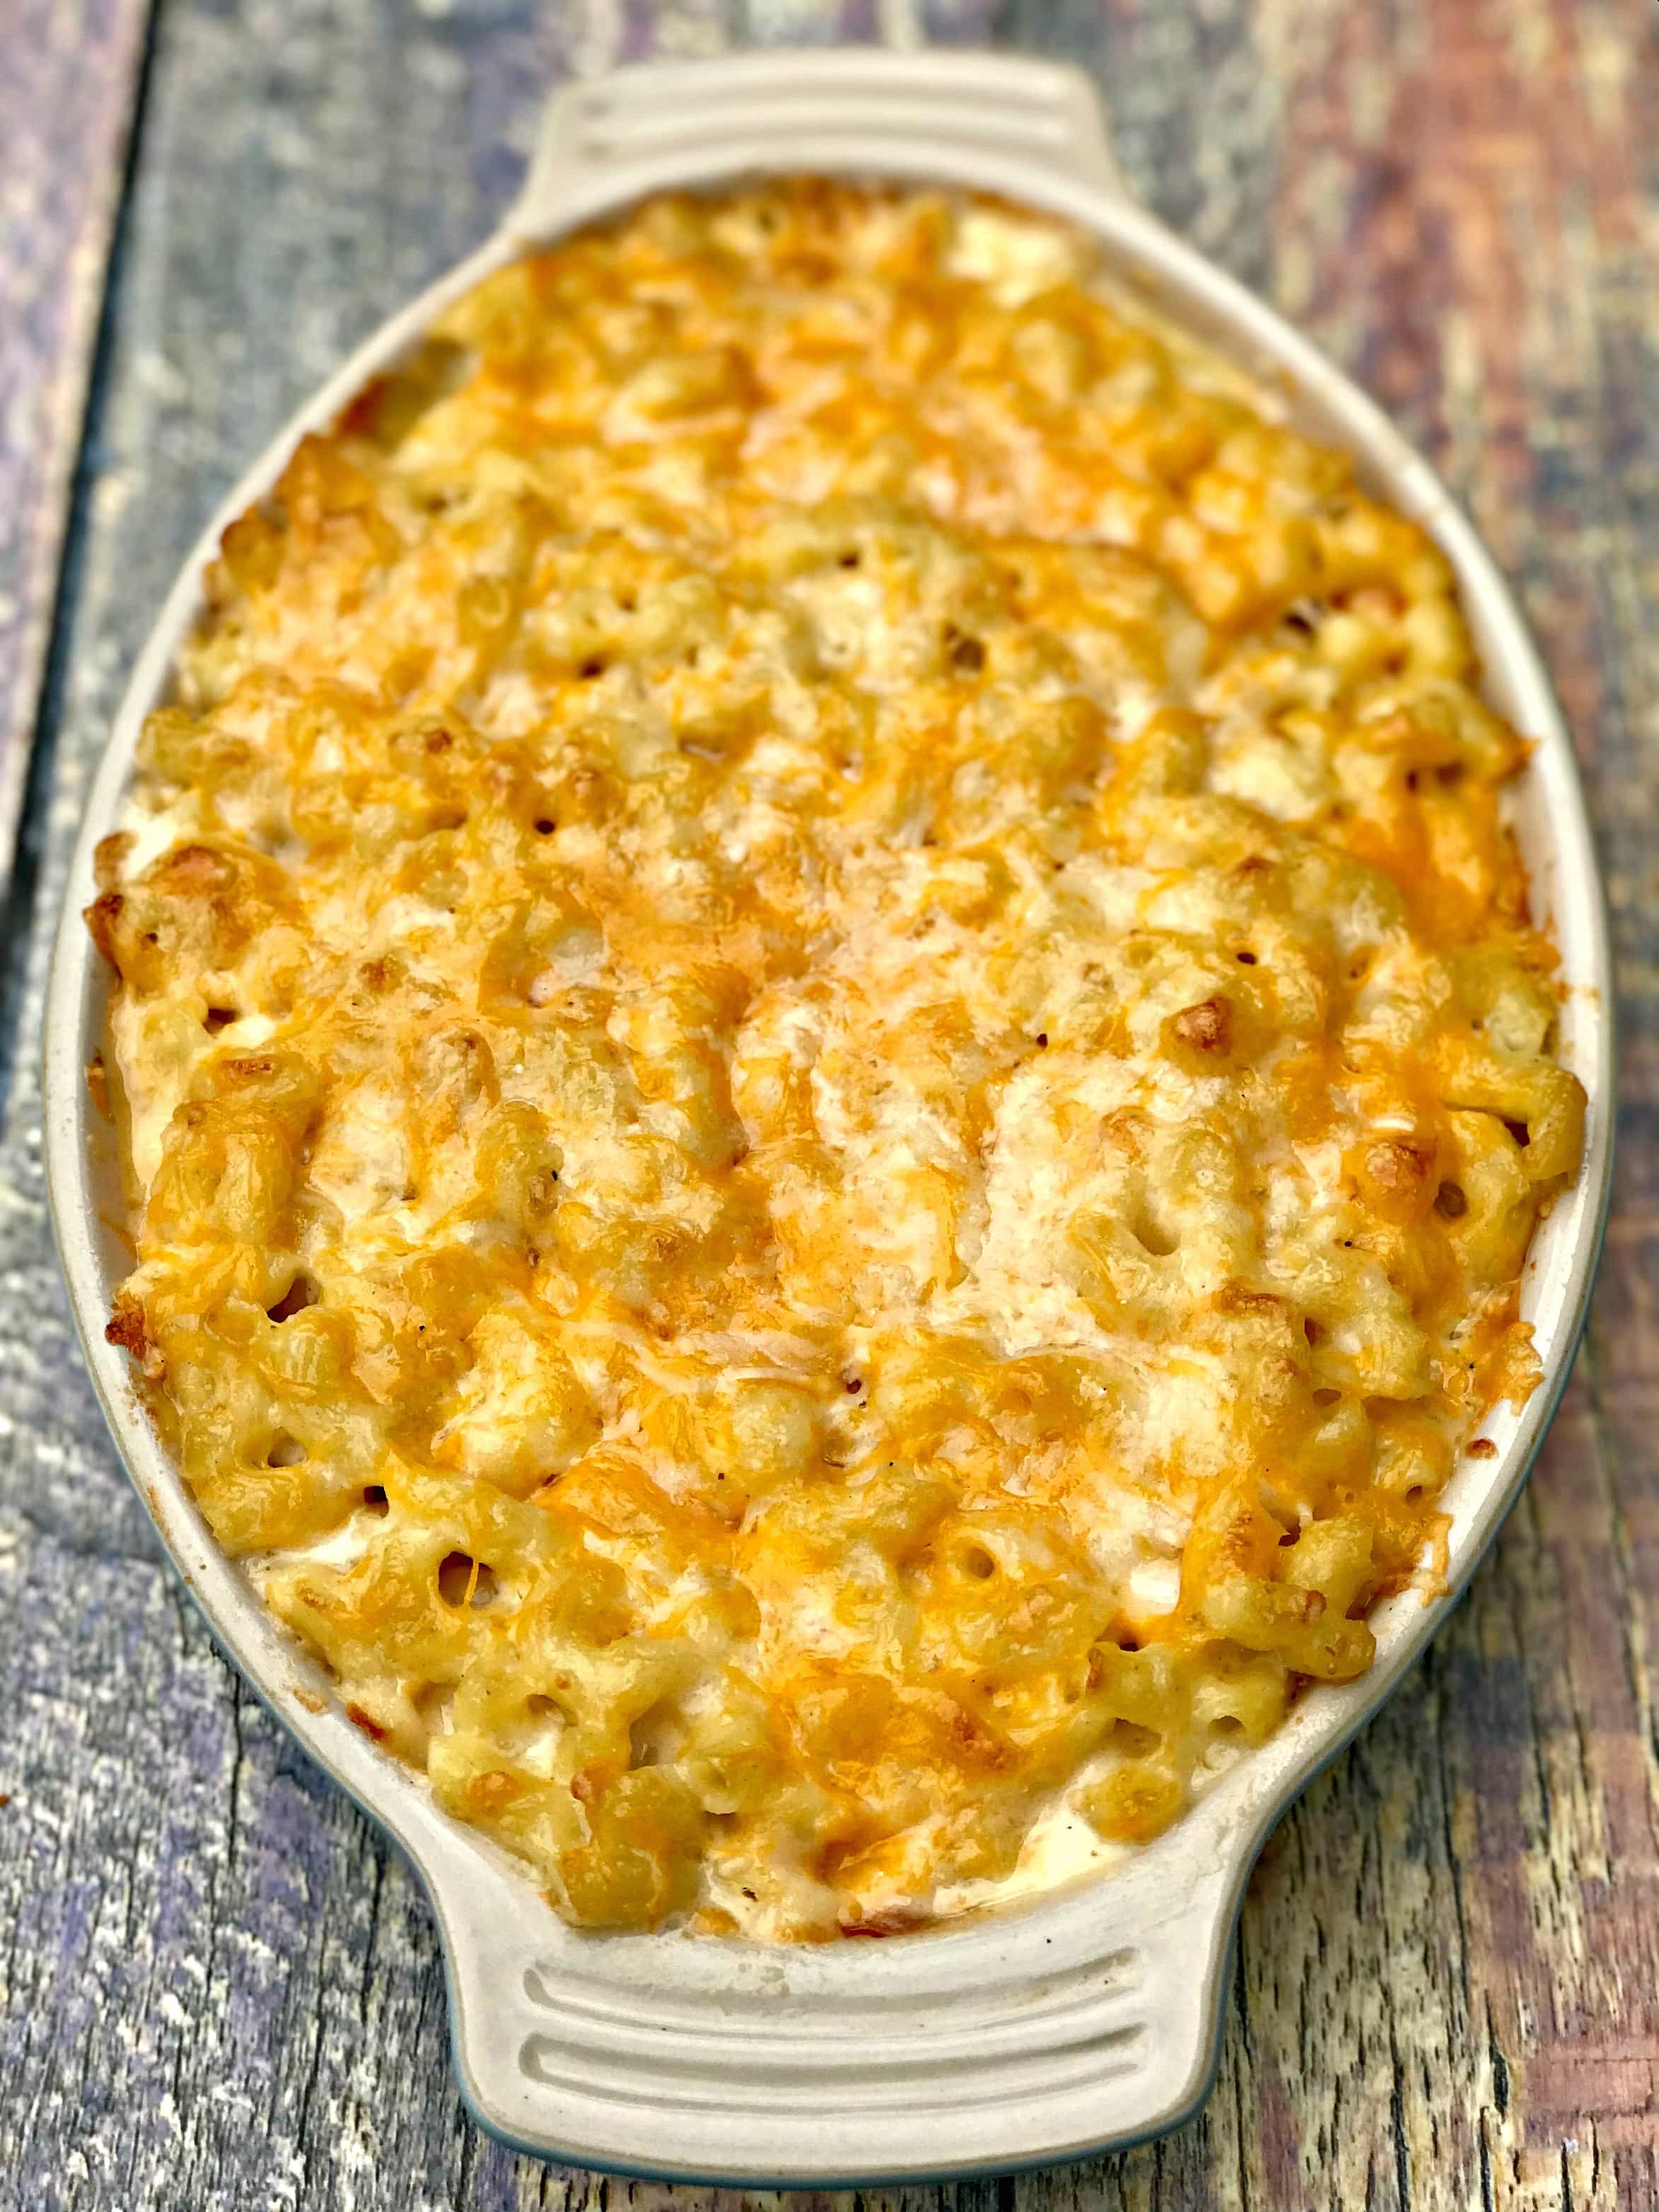 southern style baked macaroni and cheese - Stay Snatched